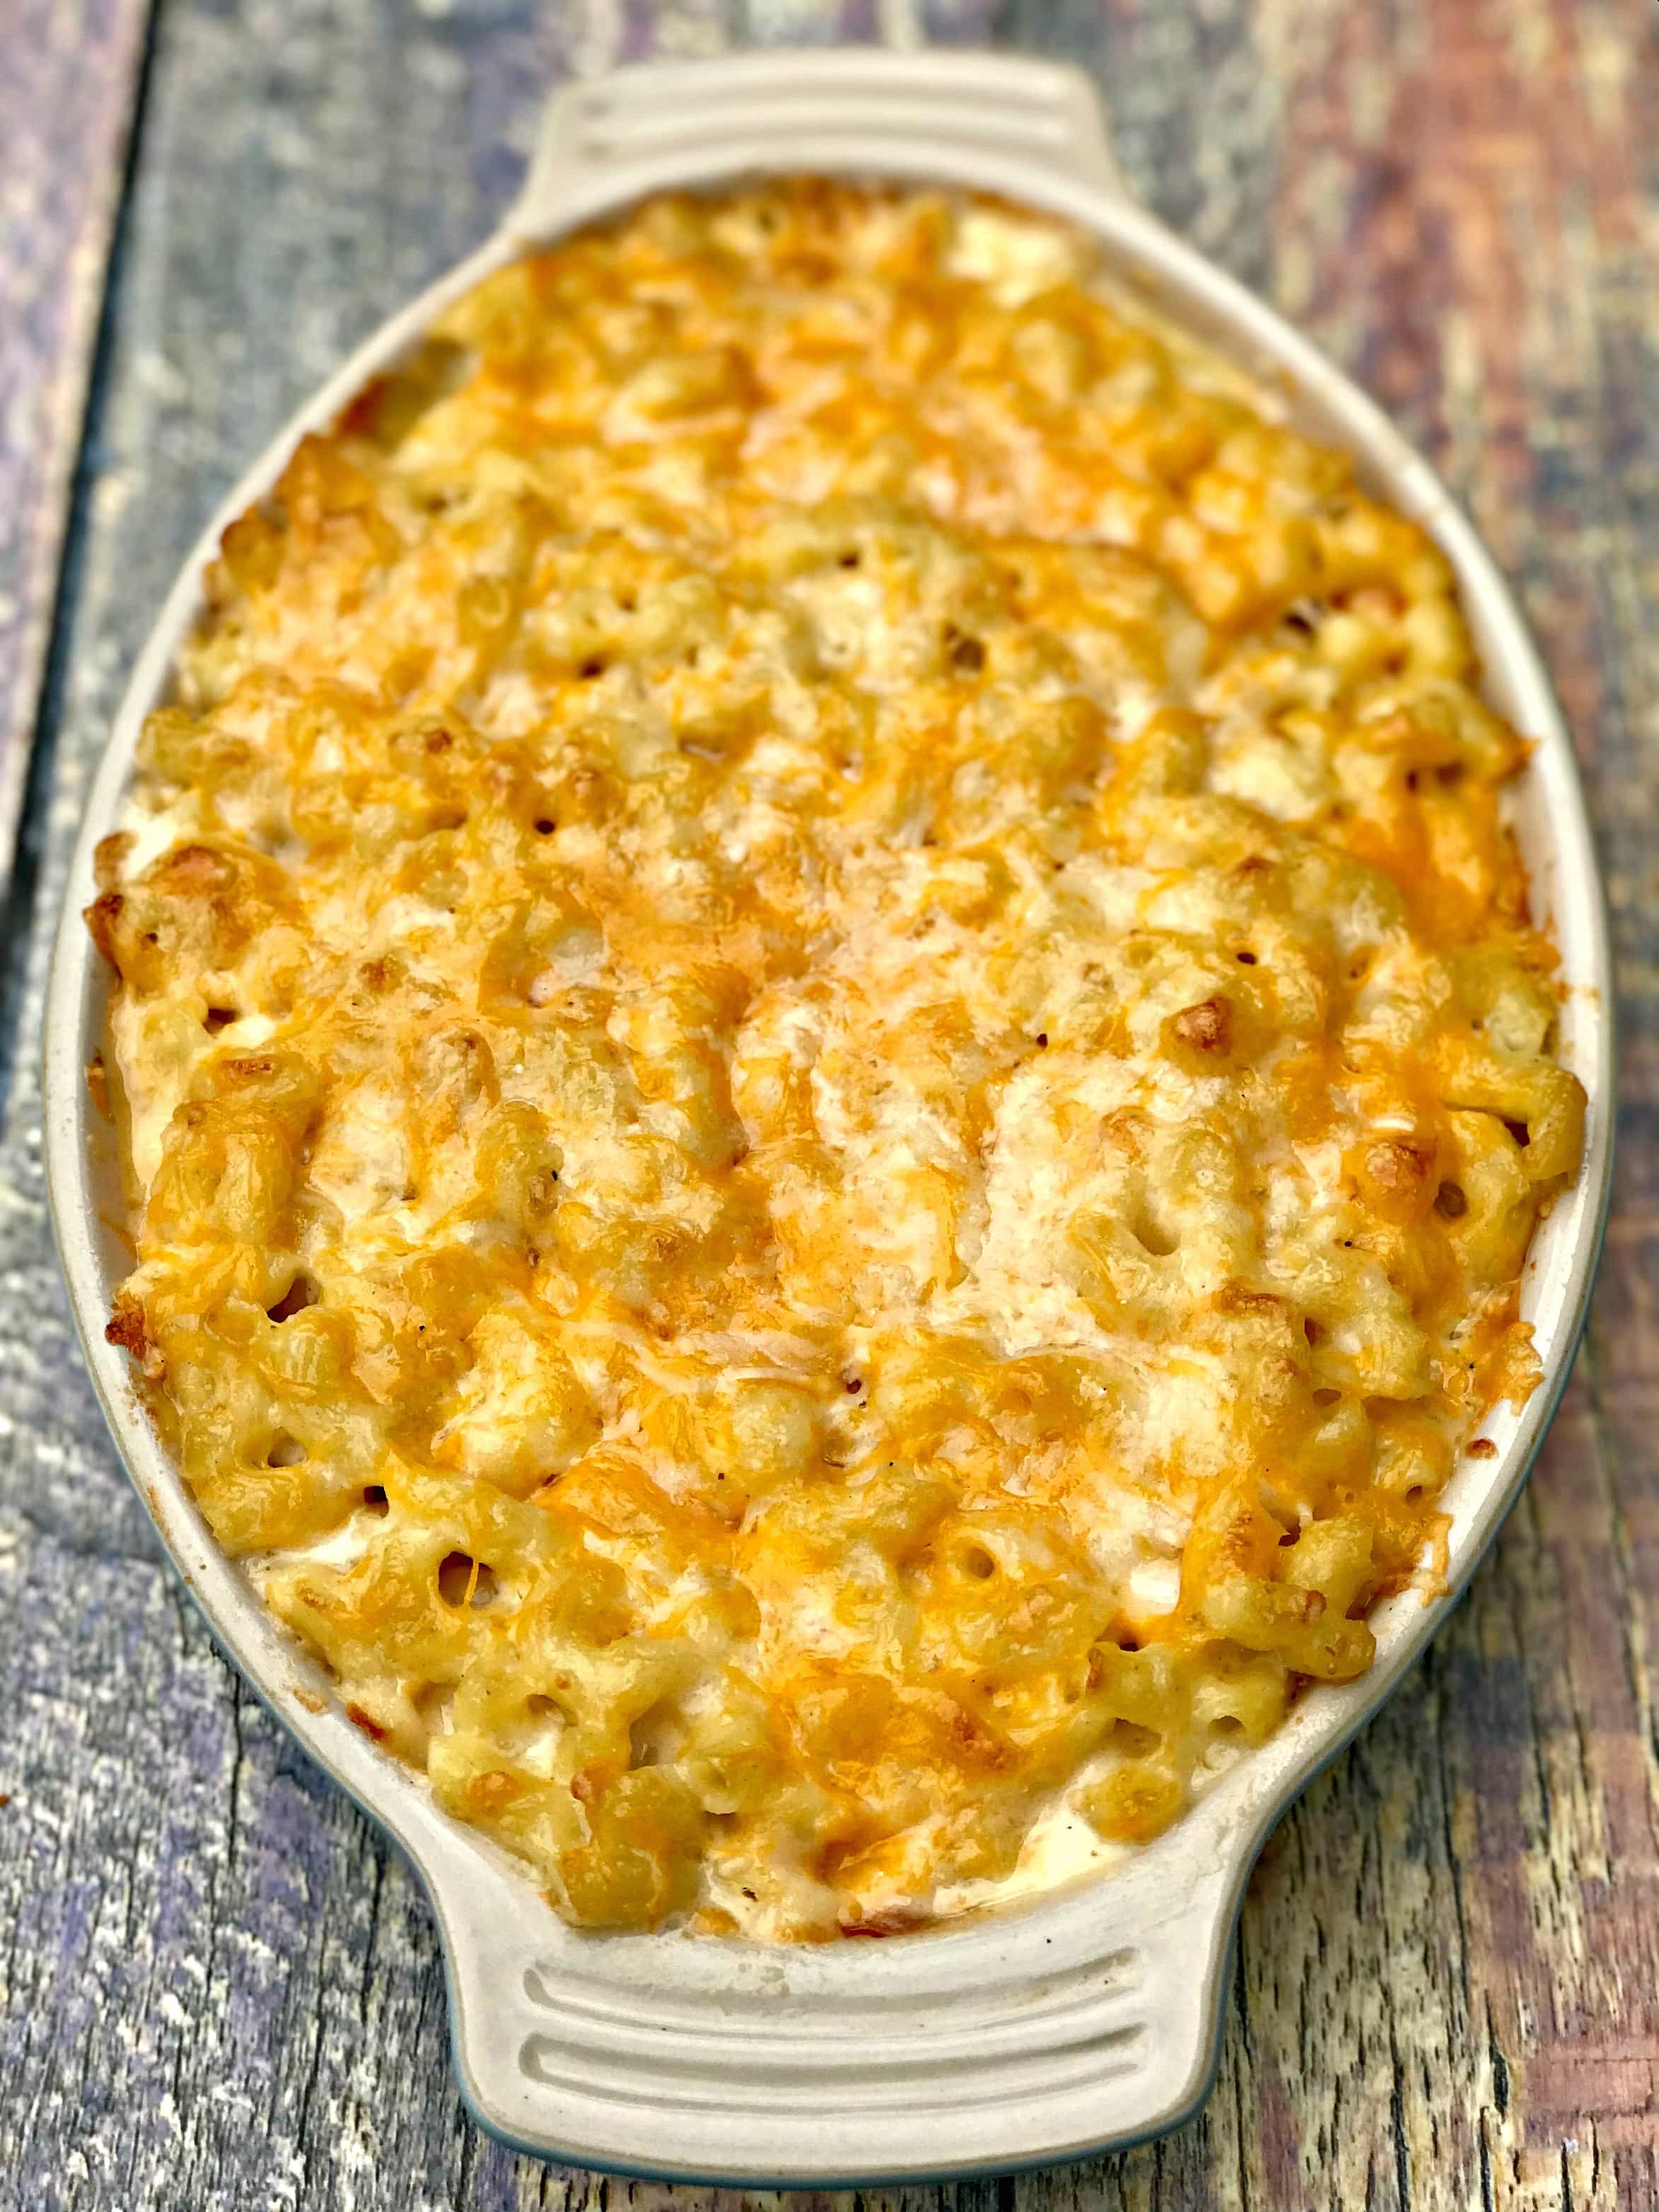 southern style baked macaroni and cheese - Stay Snatched